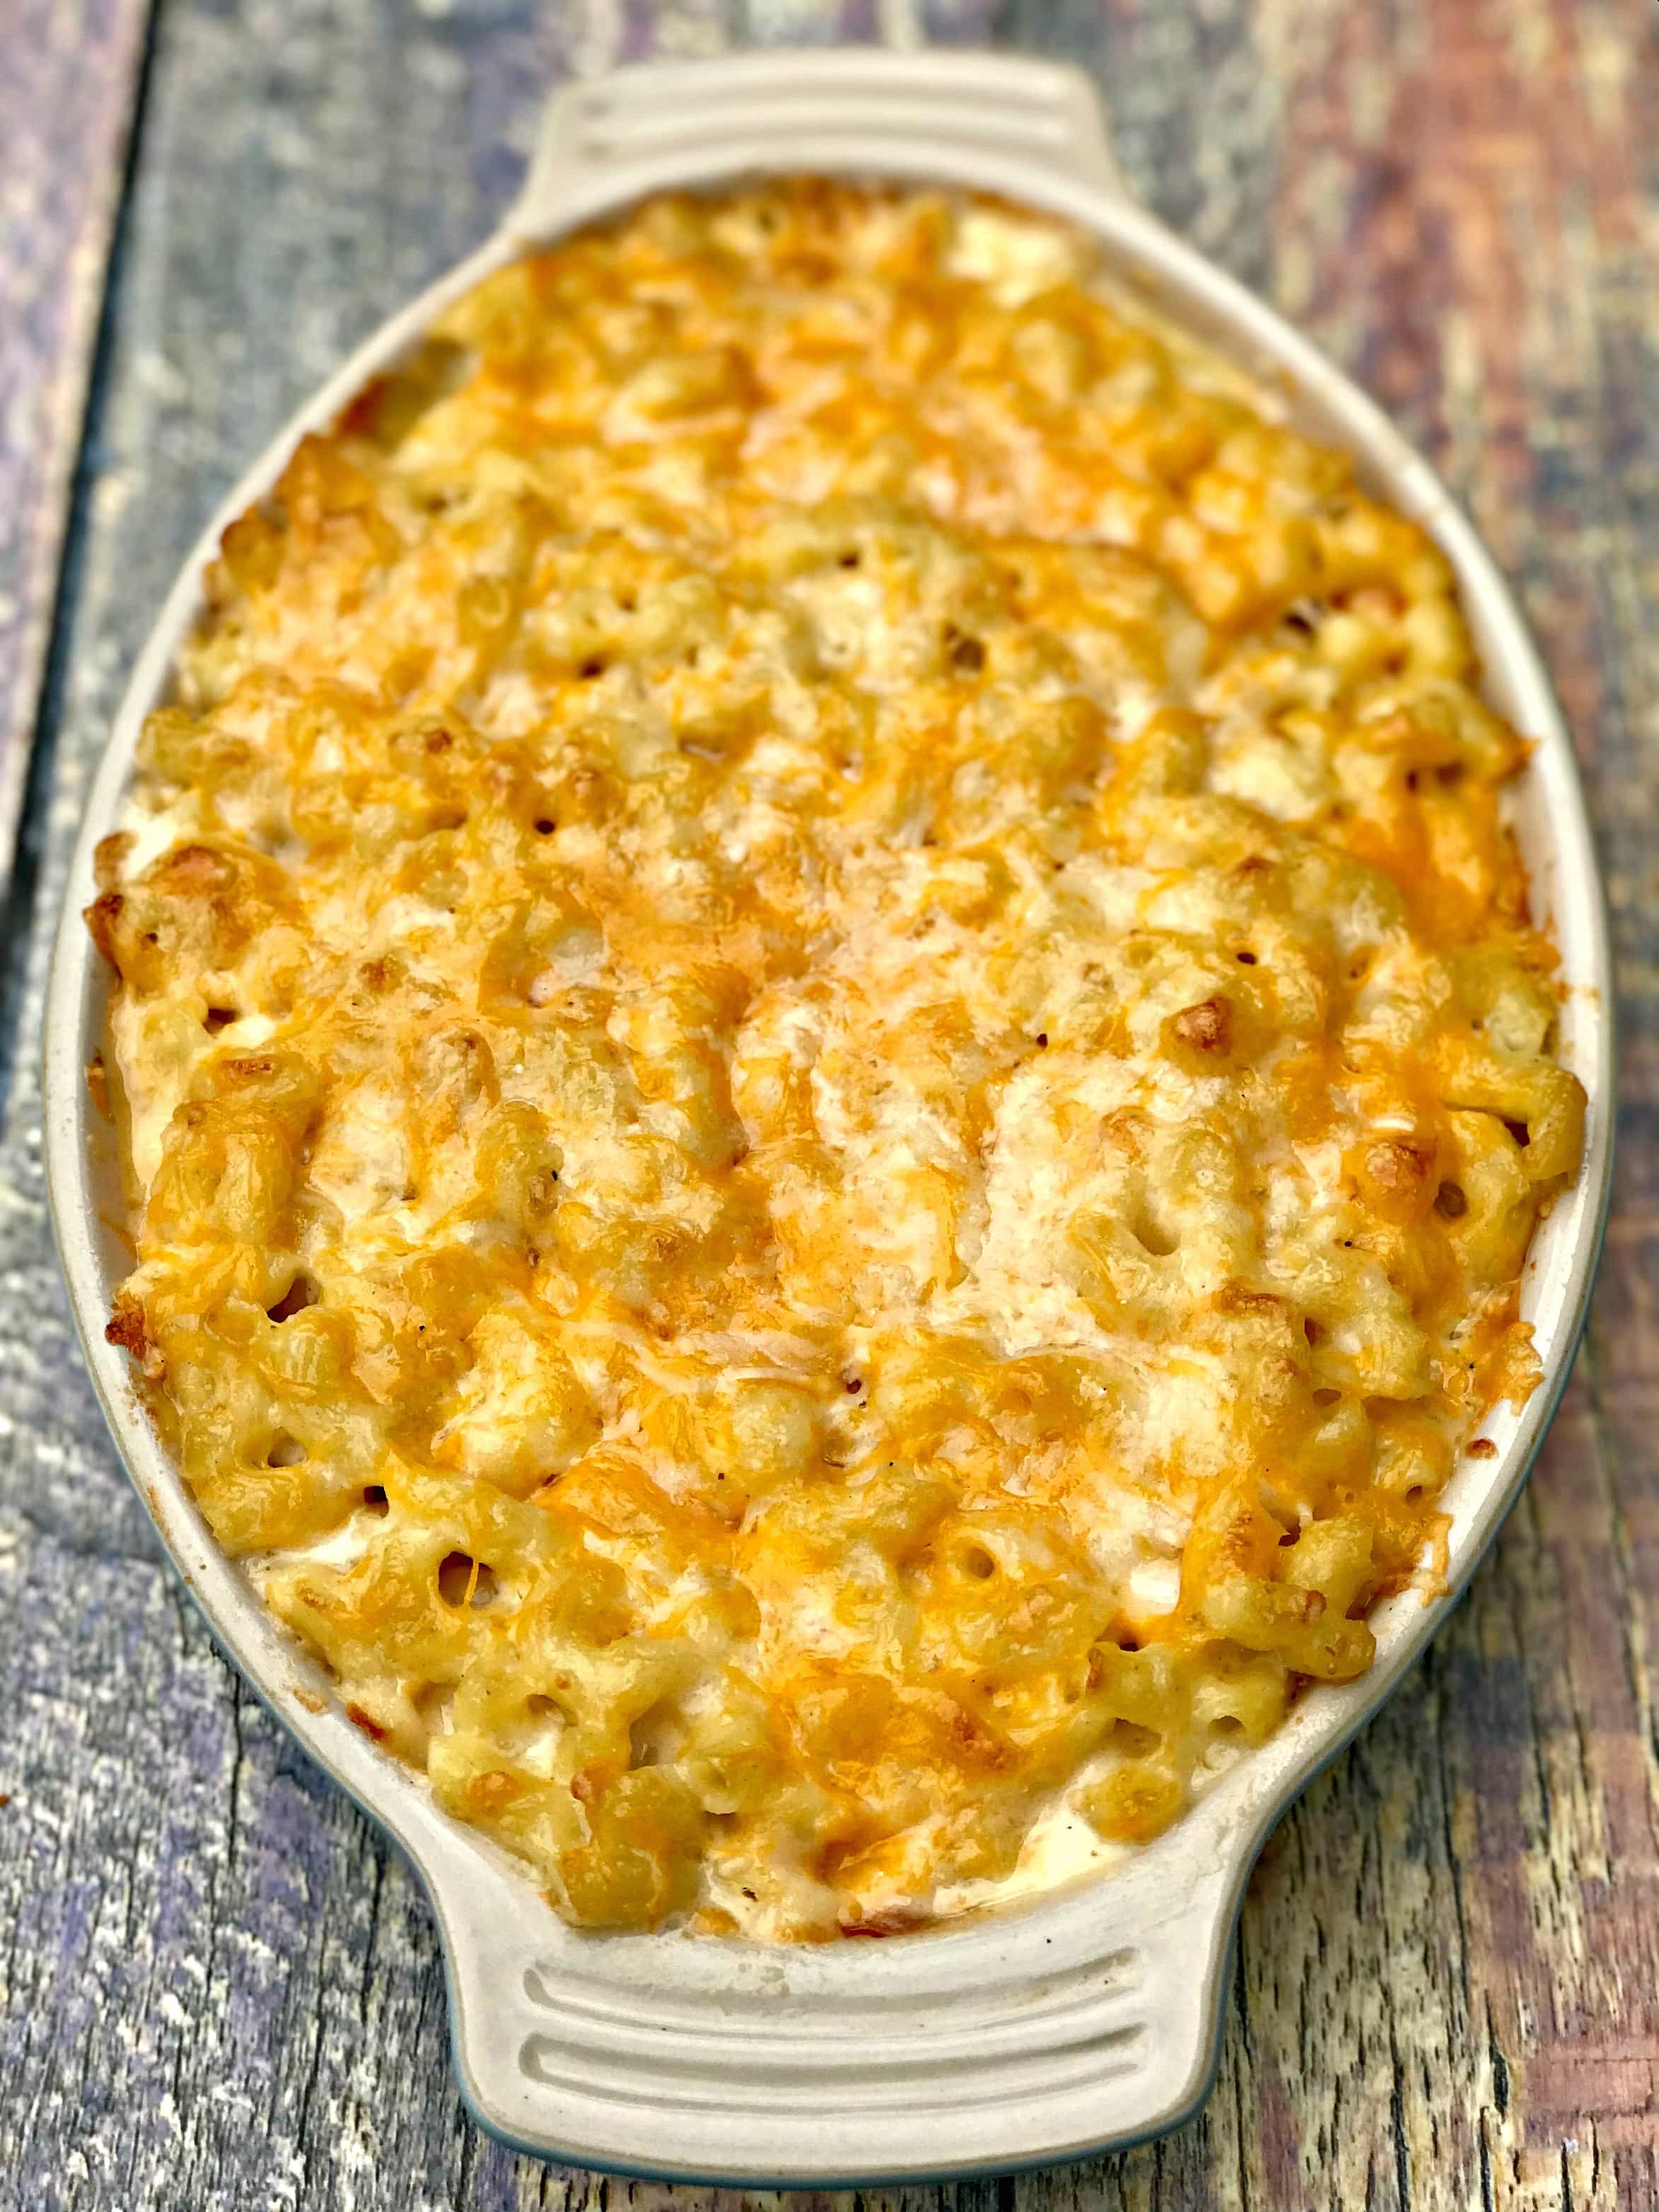 southern style baked macaroni and cheese - Stay Snatched